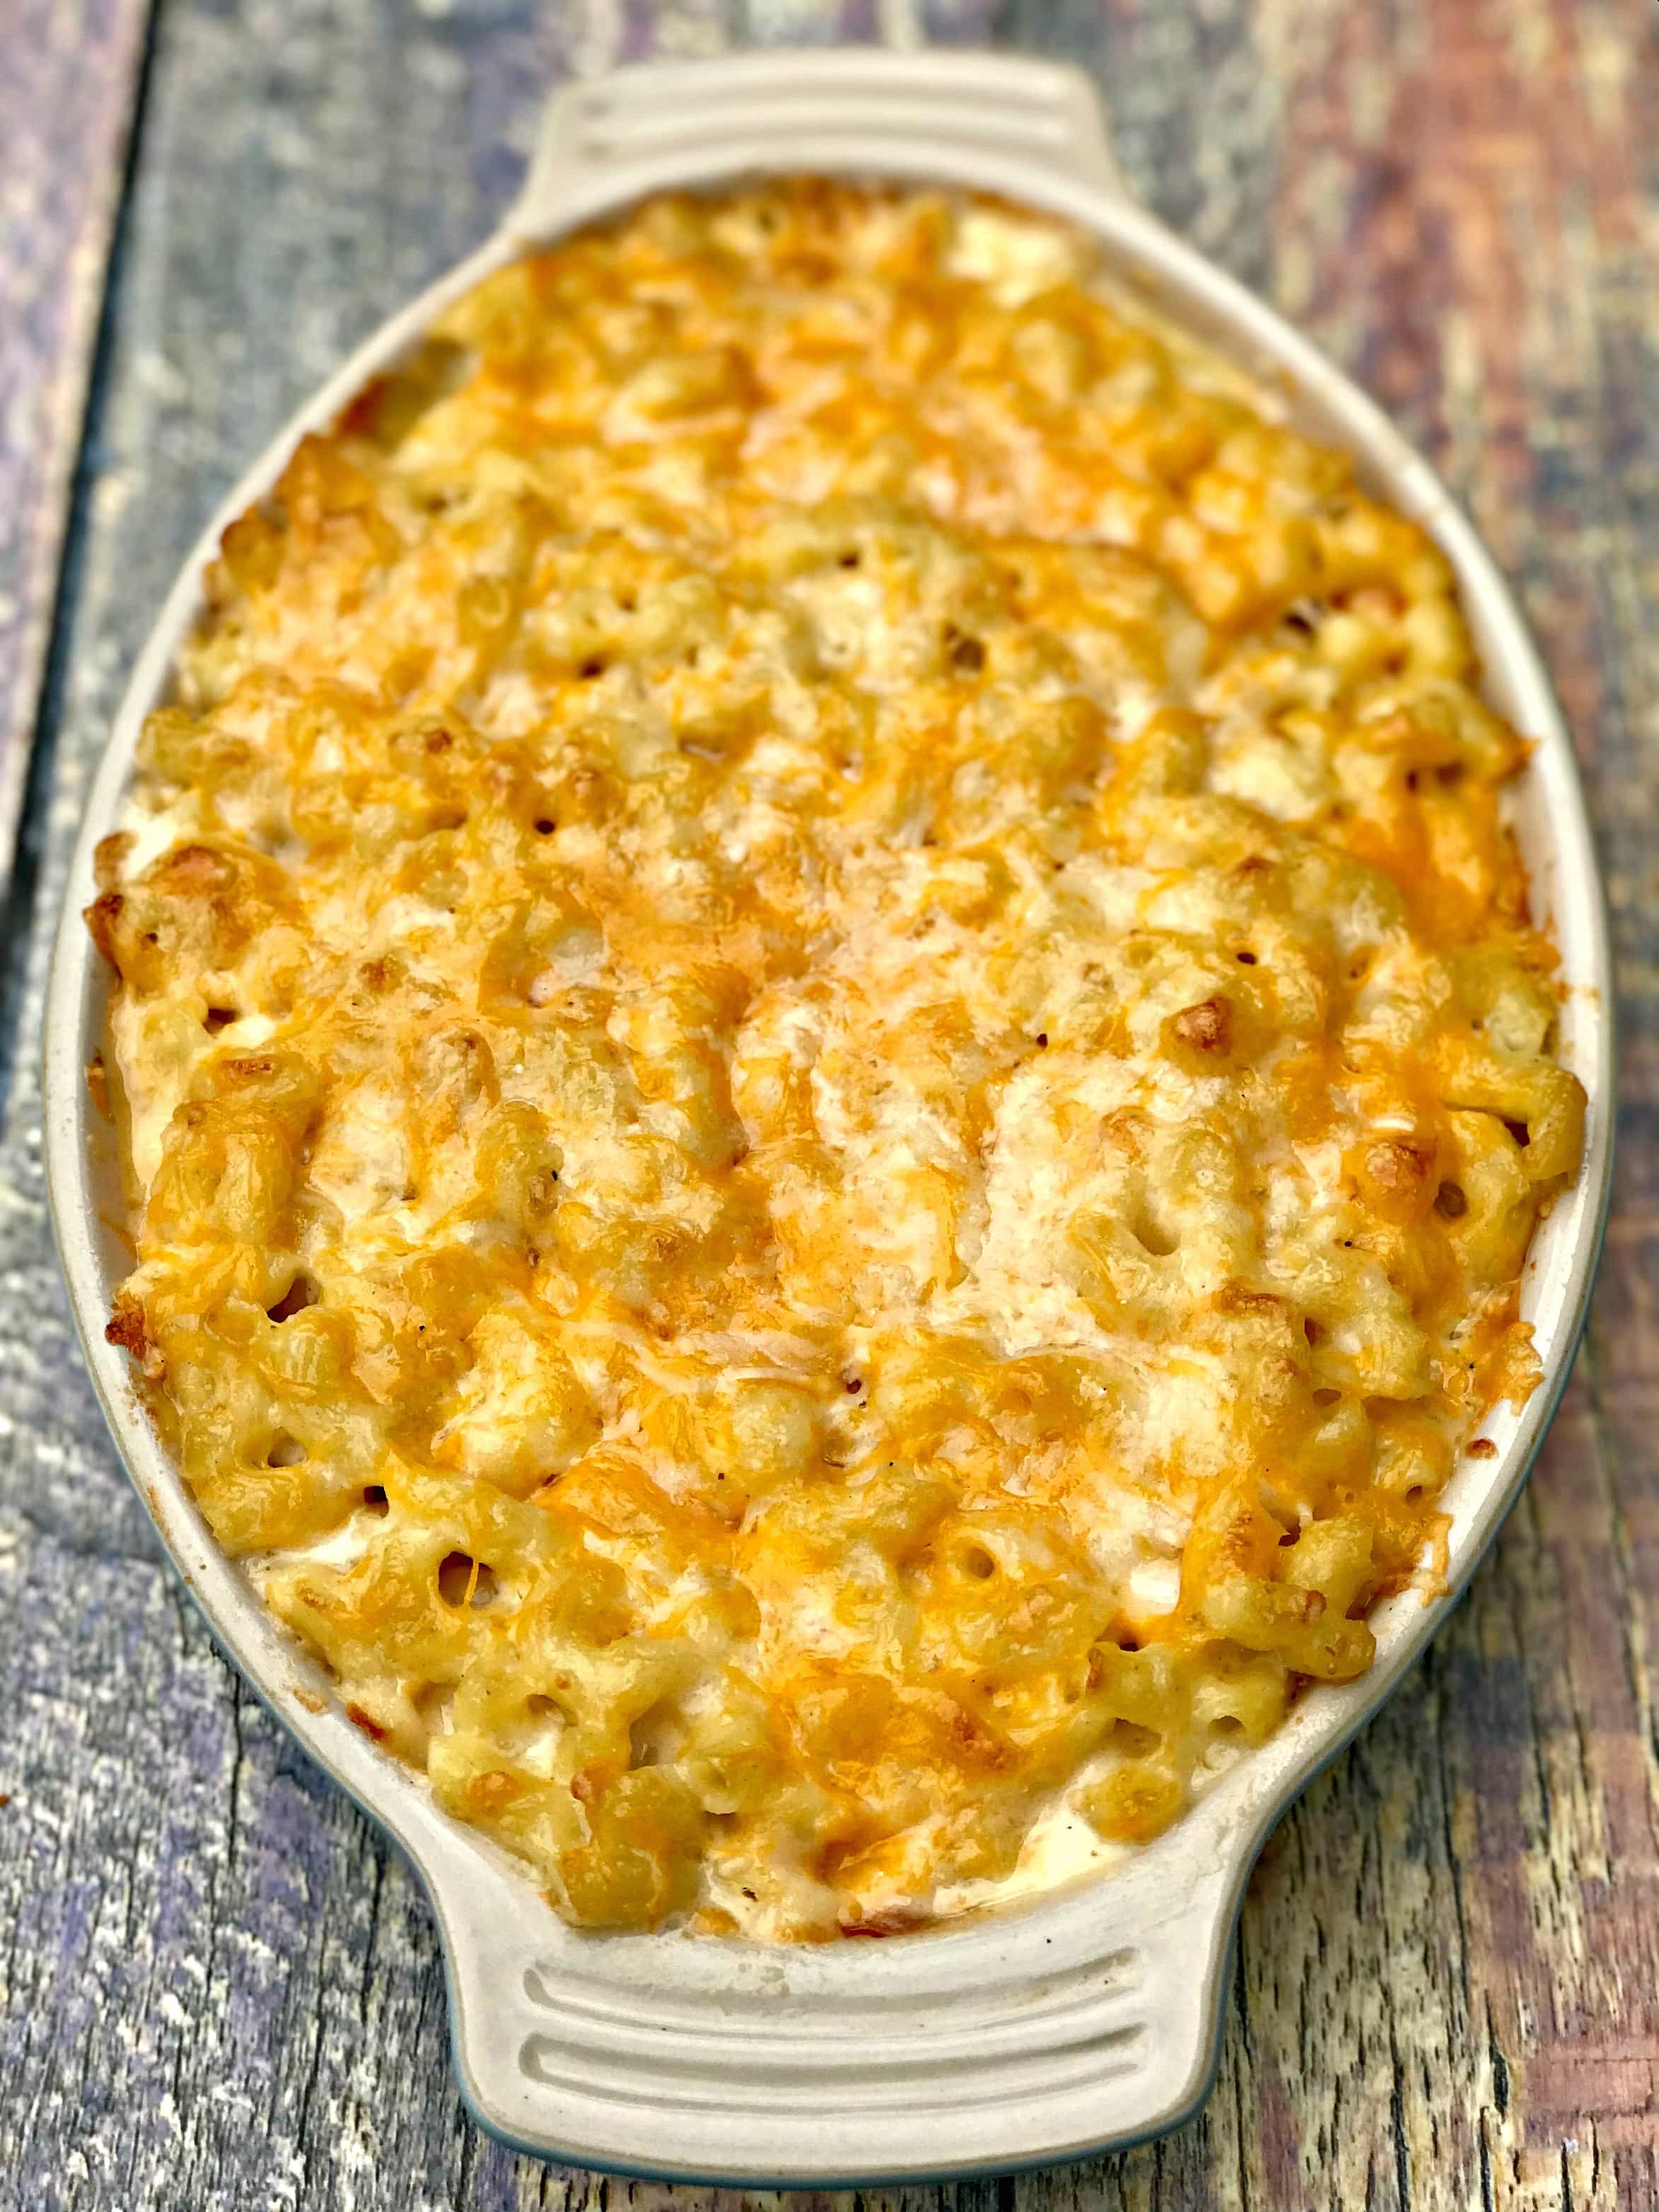 southern style baked macaroni and cheese - Stay Snatched